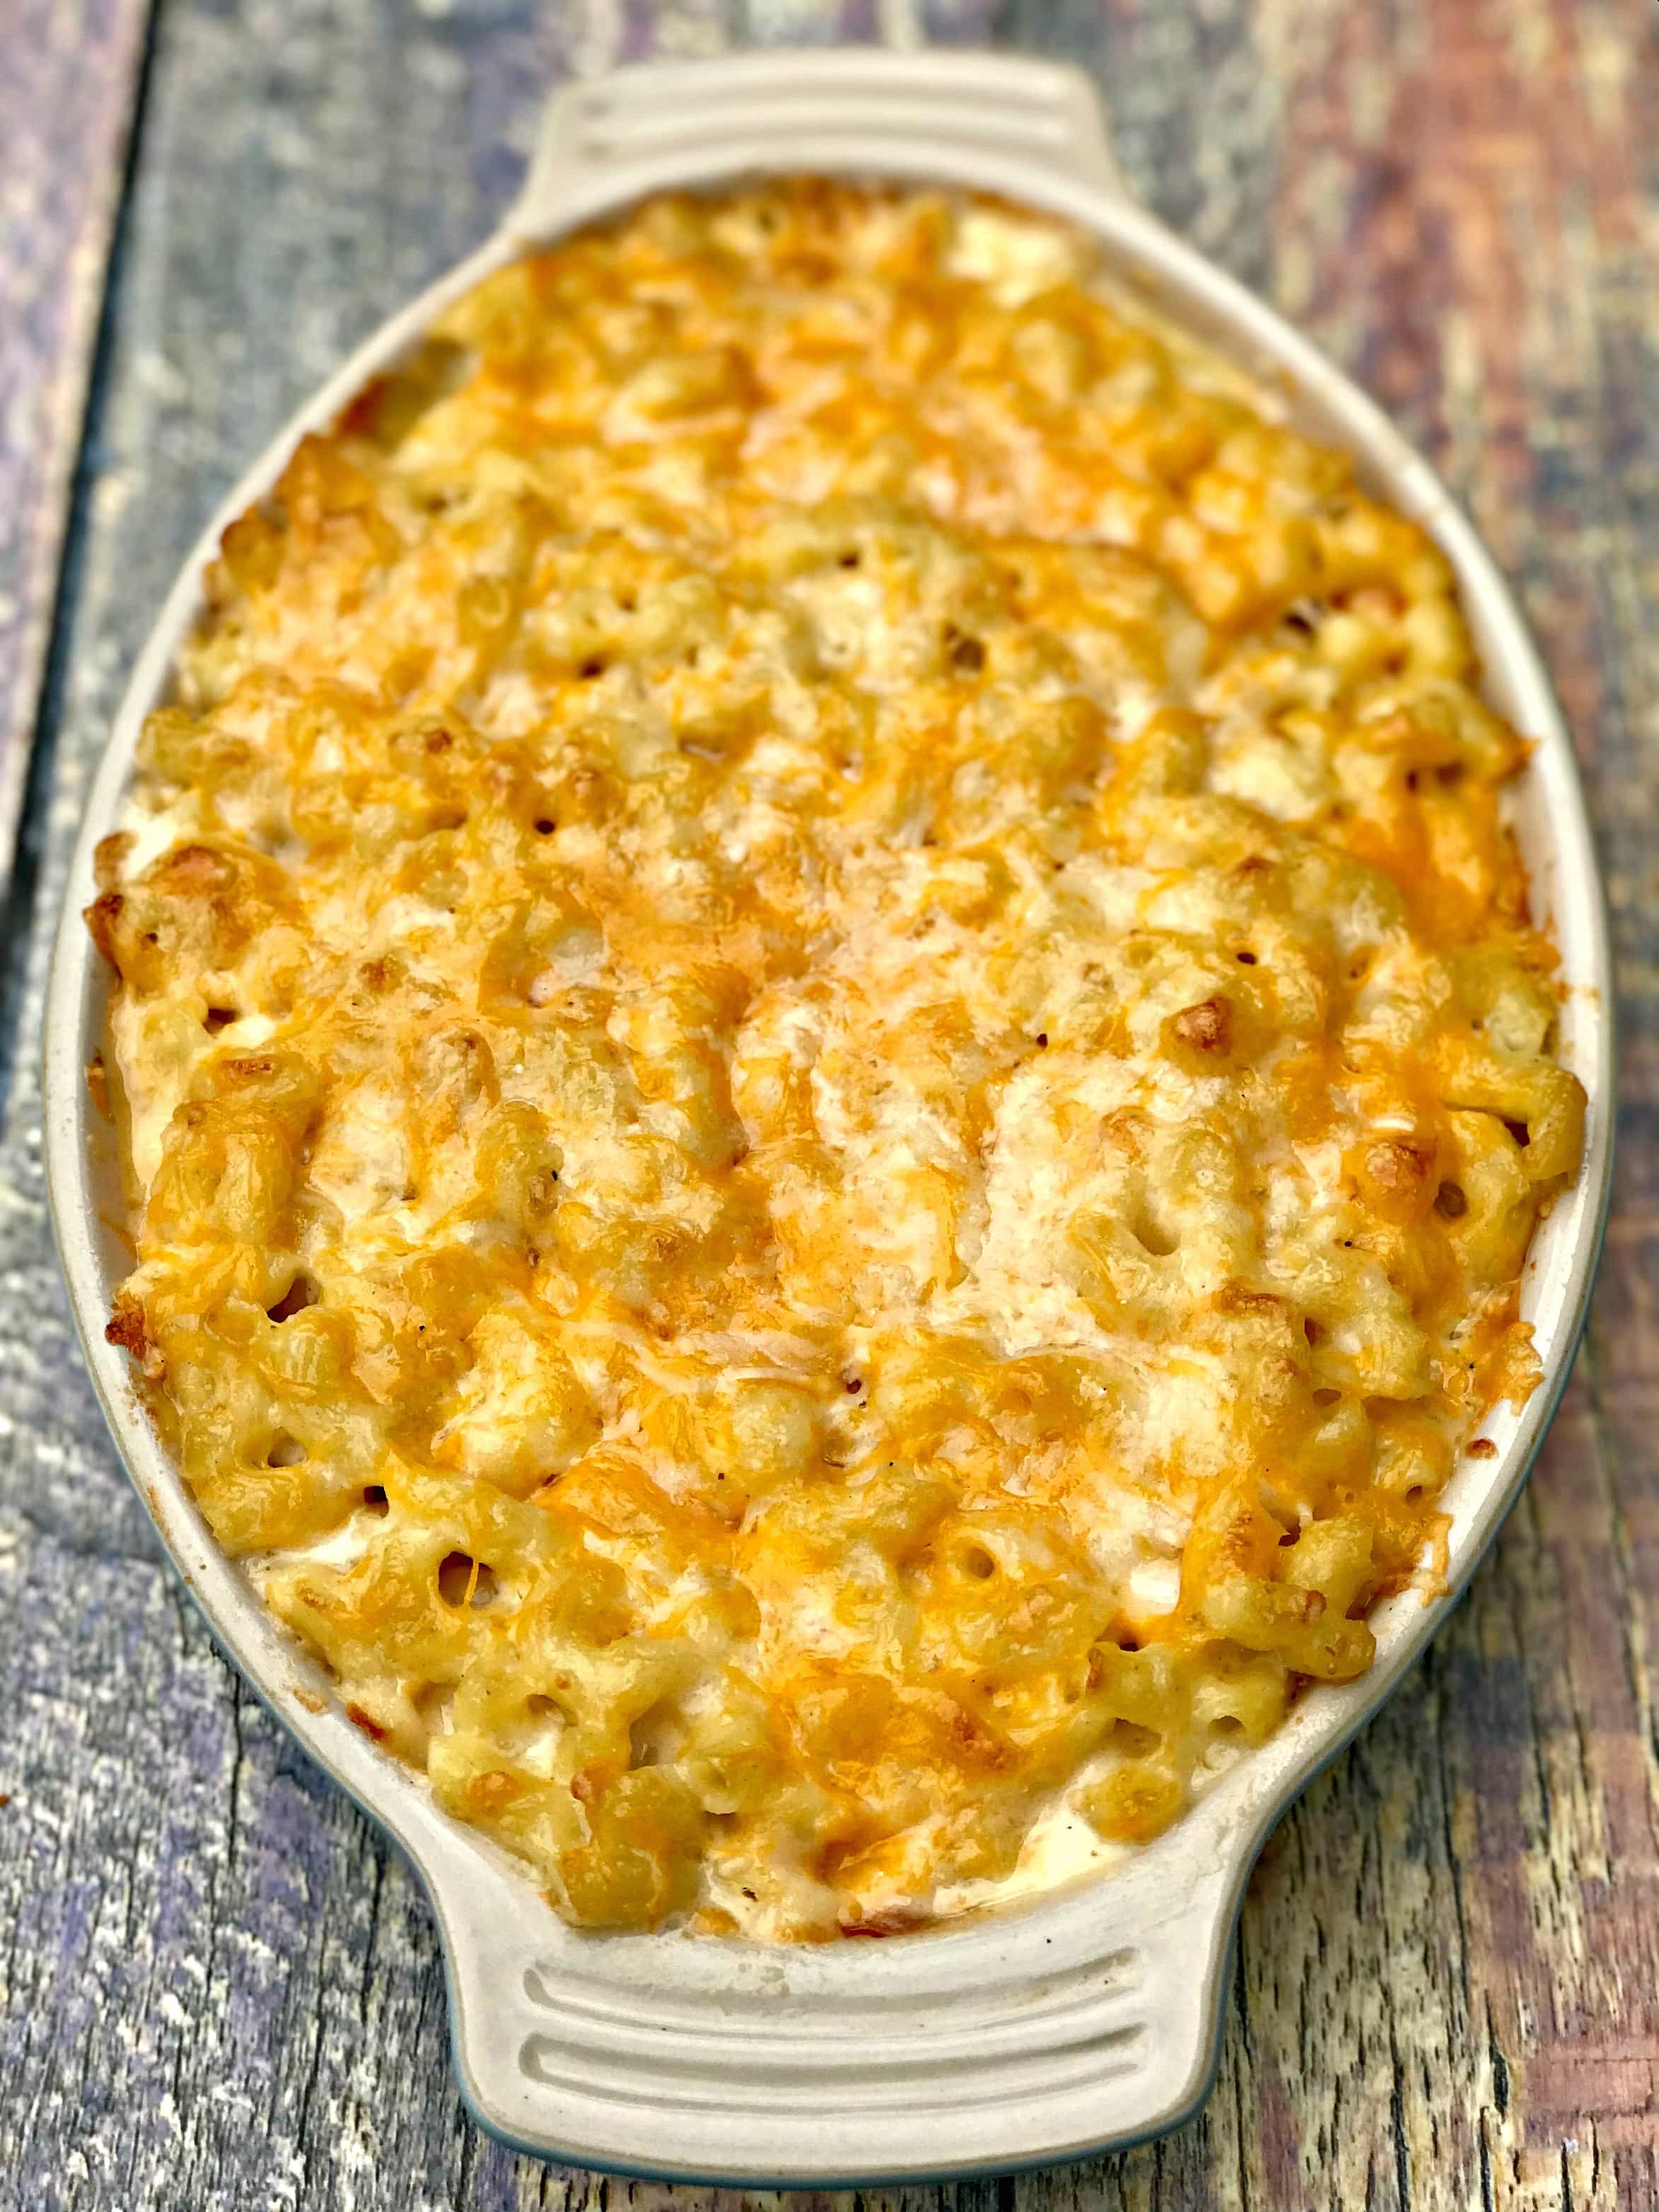 southern style baked macaroni and cheese - Stay Snatched